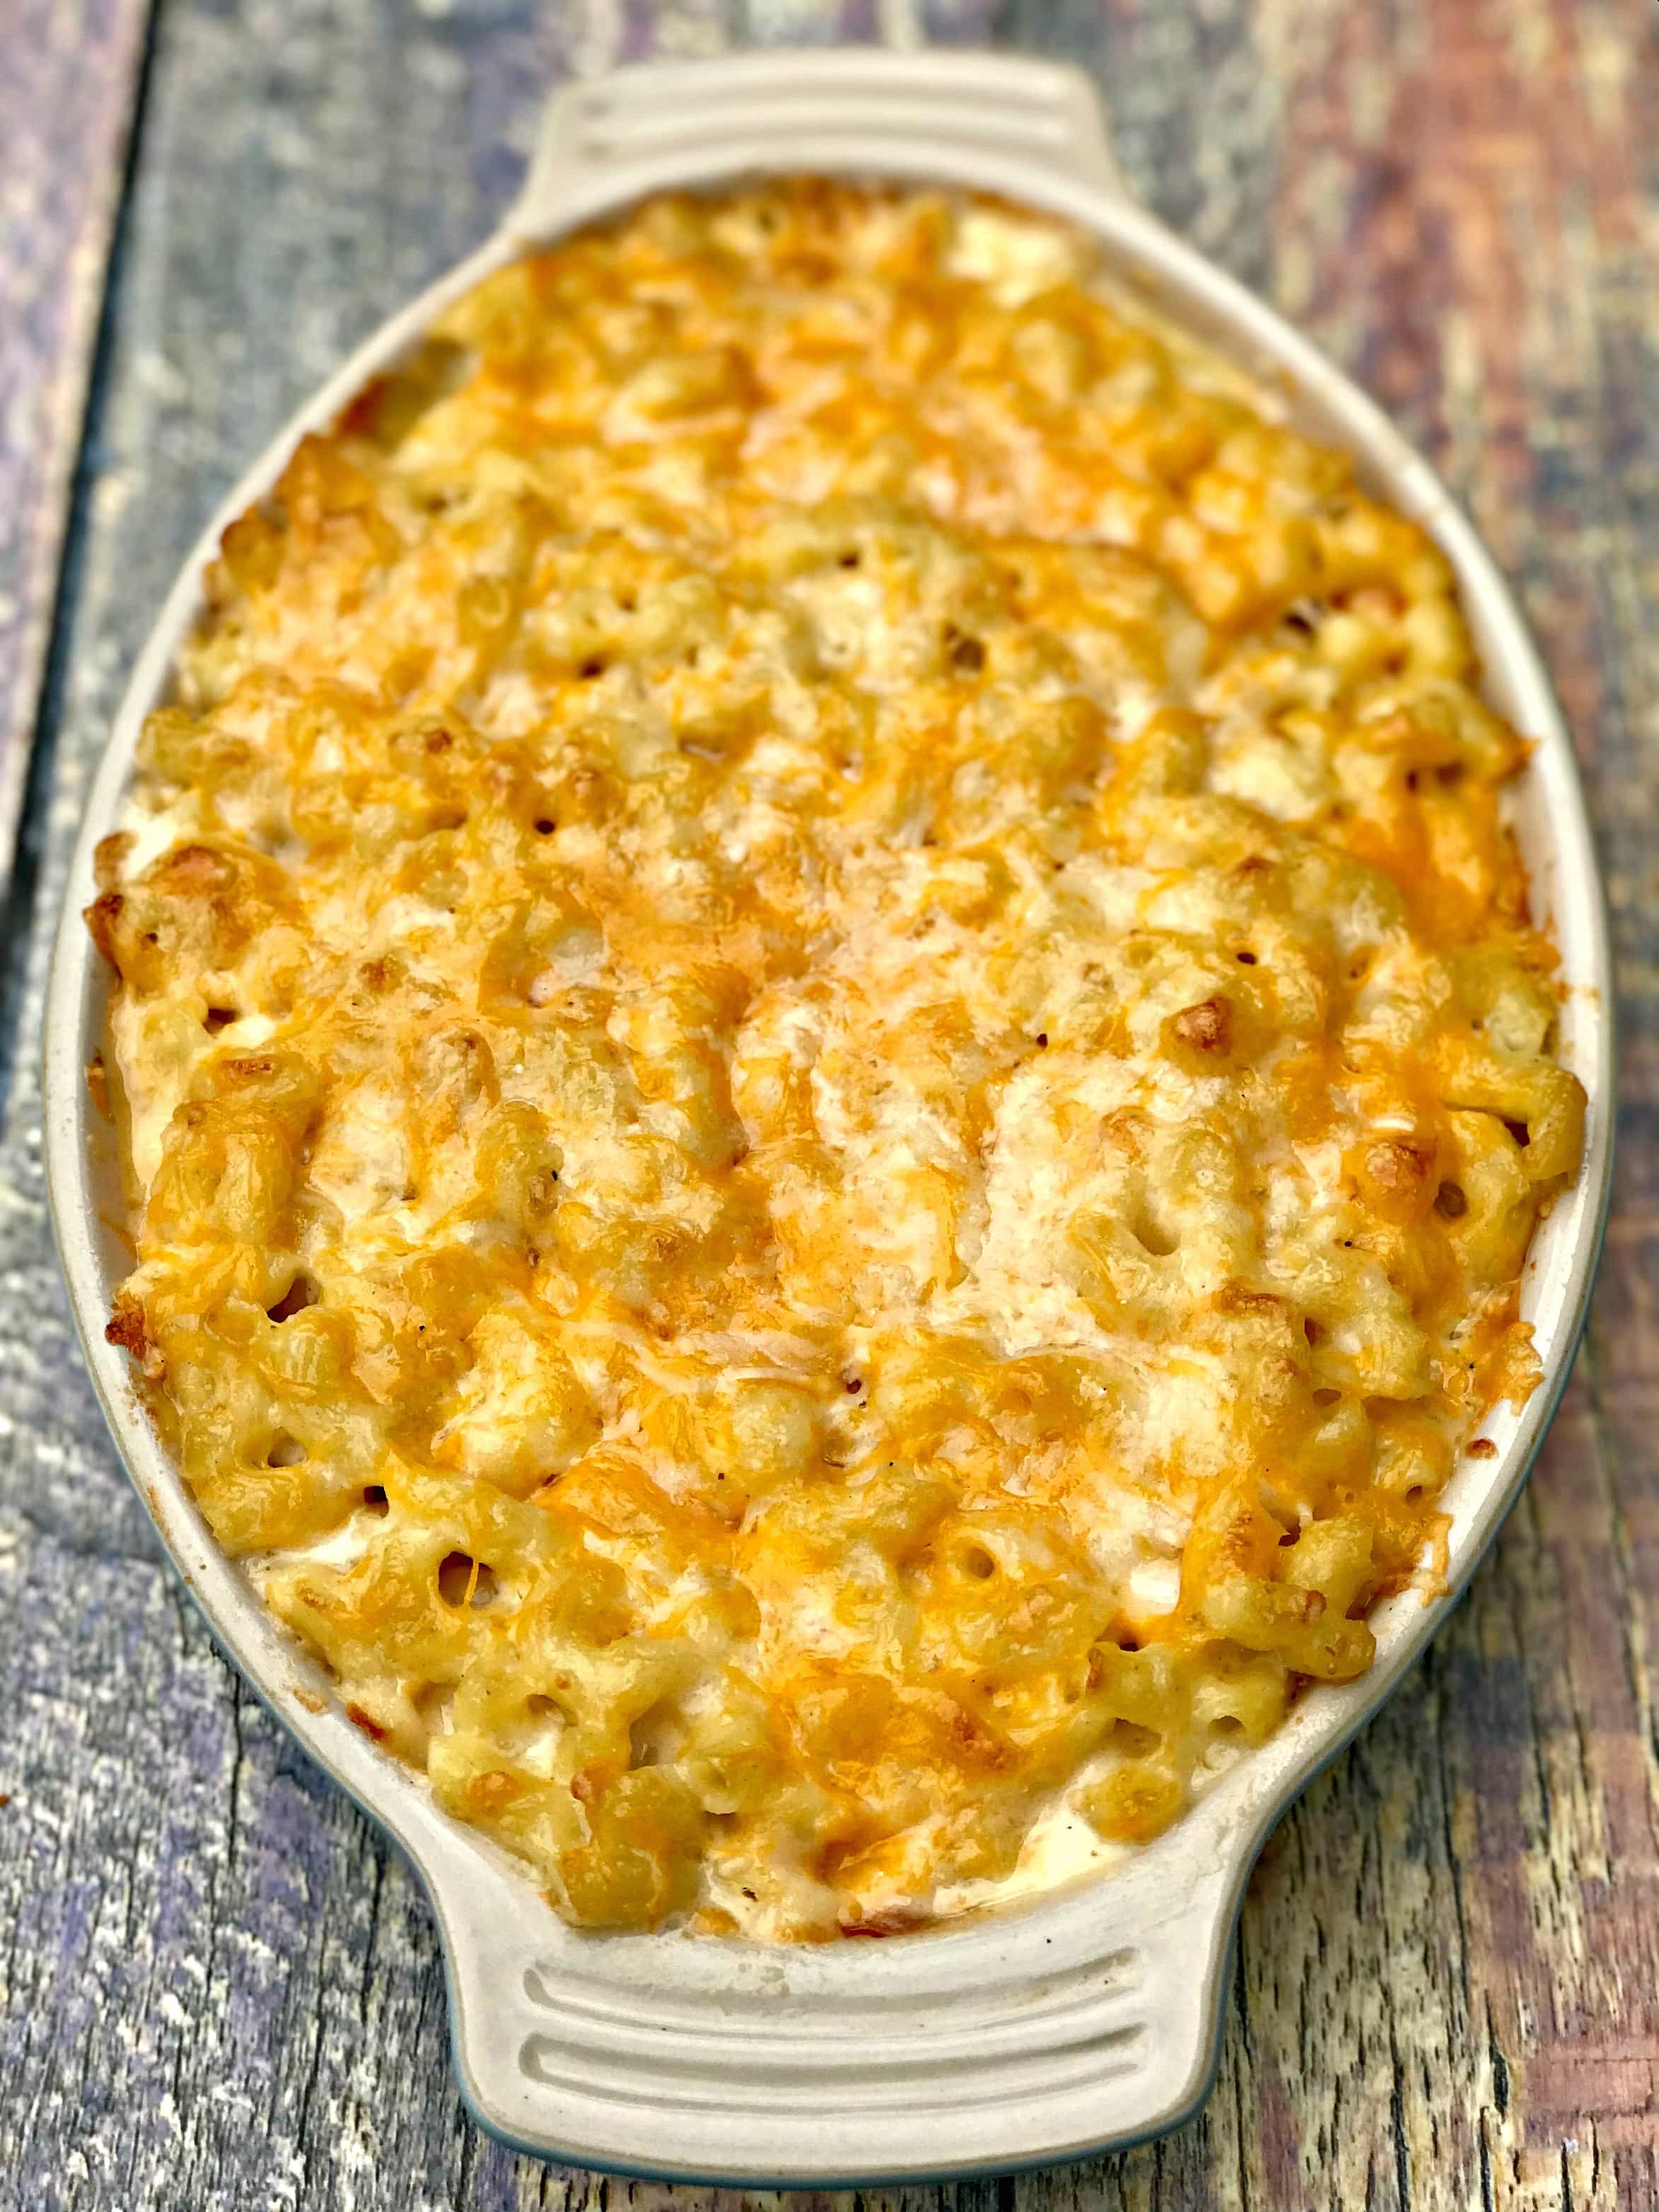 southern style baked macaroni and cheese - Stay Snatched